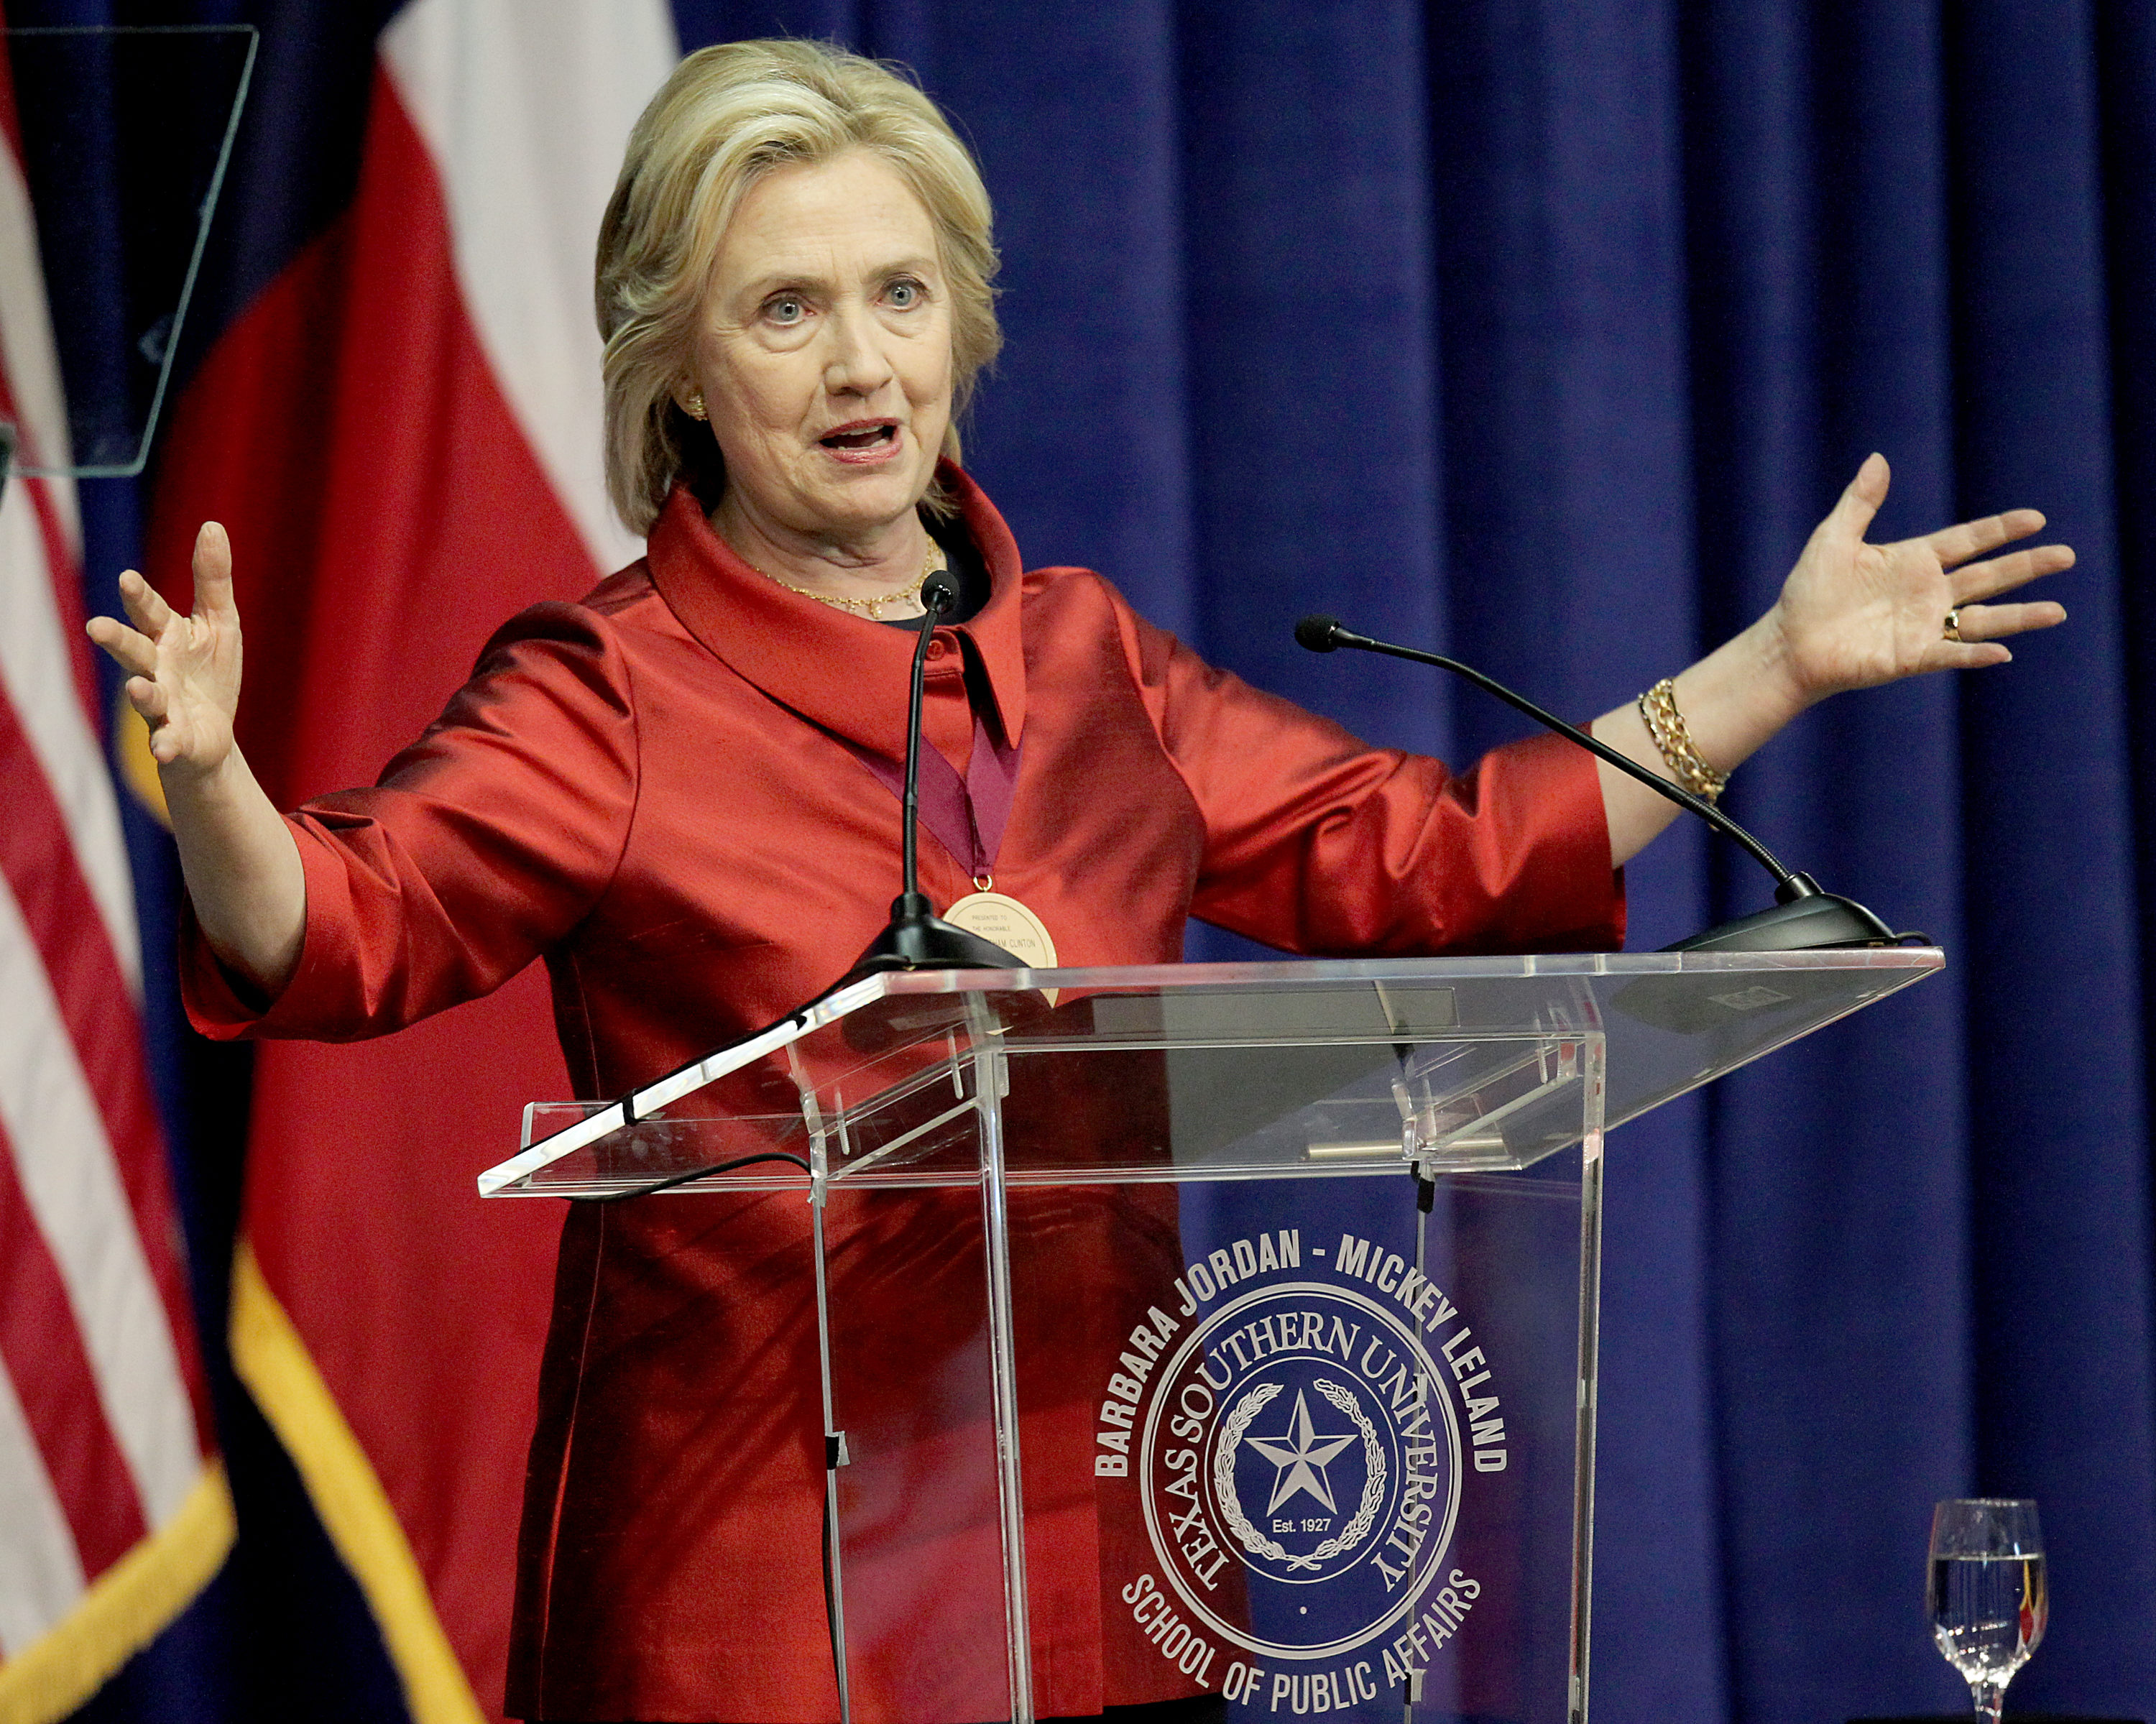 Democratic Presidential candidate Hillary Clinton speaks at the Inaugural Barbara Jordan Gold Medallion at Texas Southern University on June 4, 2015 in Houston, Texas. (Thomas Shea&mdash;Getty Images)